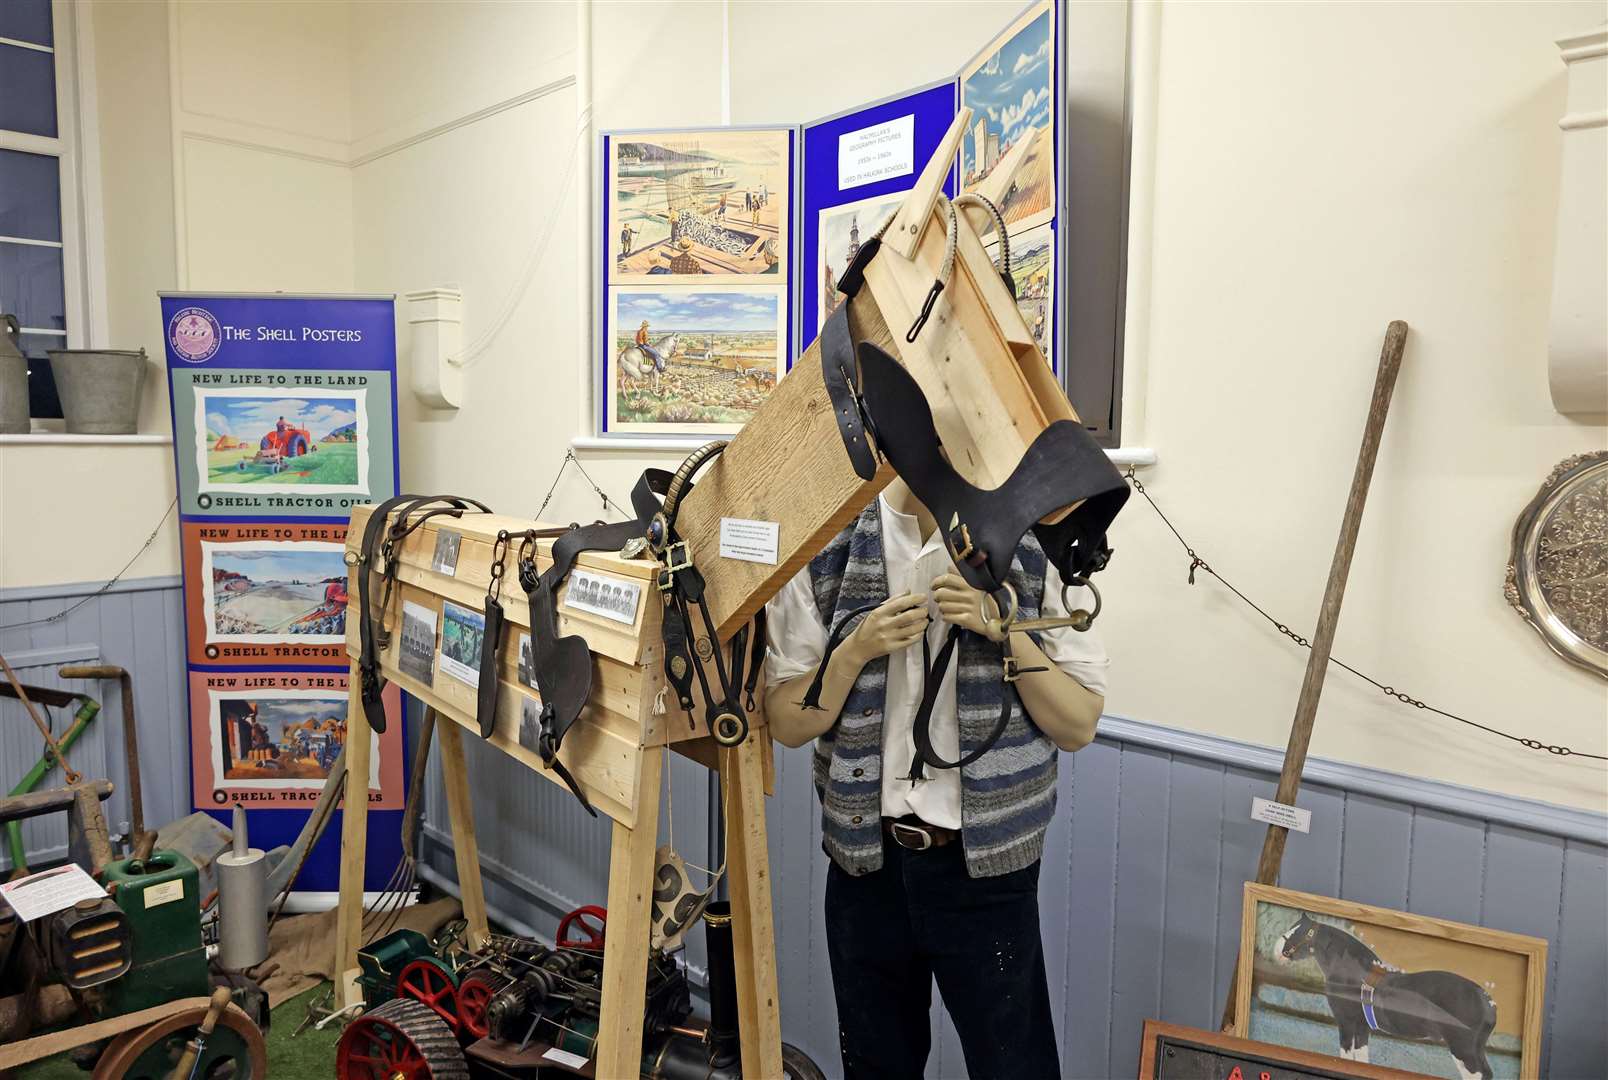 A wooden horse as part of the Life on the Land exhibition. Picture: James Gunn